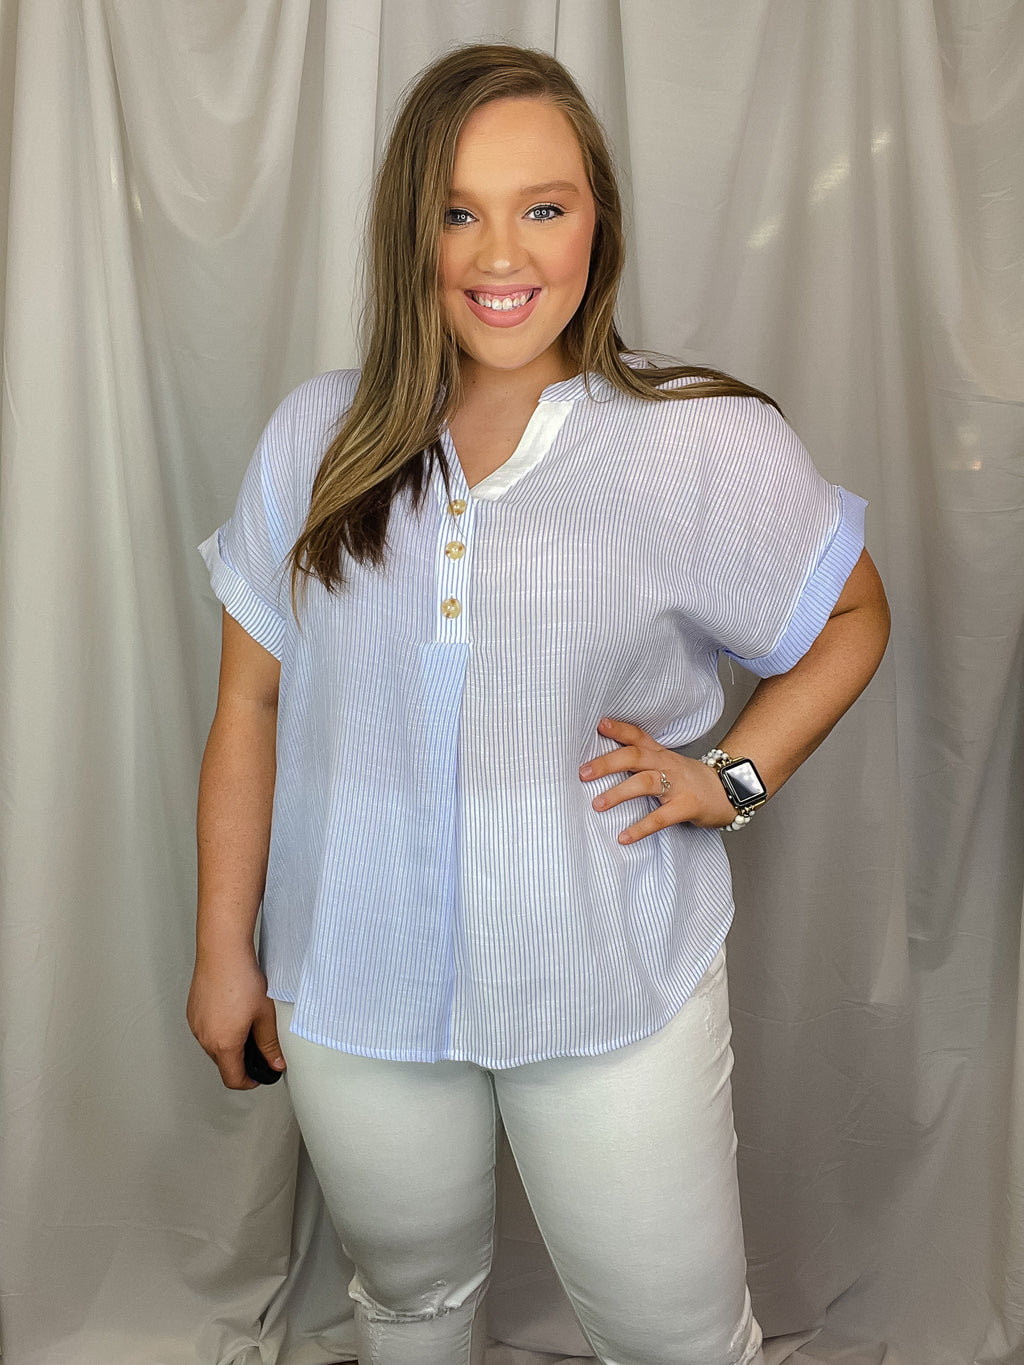 Top features a blue base, white pin stripe detail, V-neck line, cuffed short sleeves and runs true to size!   Materials:  63% Rayon / 37% Polyester 